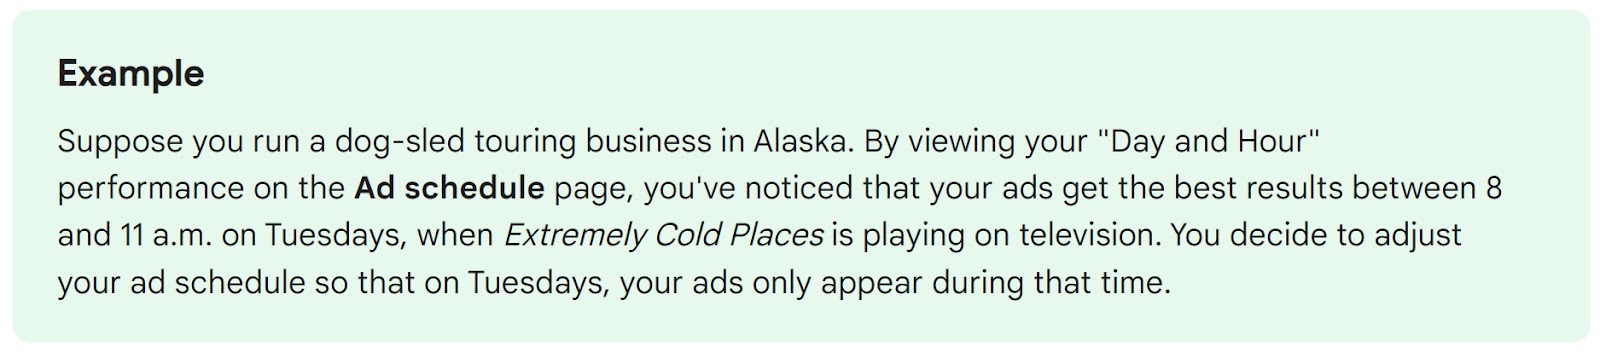 Suppose you run a -sled touring business in Alaska. By viewing your "Day and Hour" performance on the Ad schedule page, you've noticed that your ads get the best results between 8 and 11 a.m. on Tuesdays, when Extremely Cold Places is paying on television. You decide to adjust your ad schedule so that on Tuesdays, your ads only appear during that time.